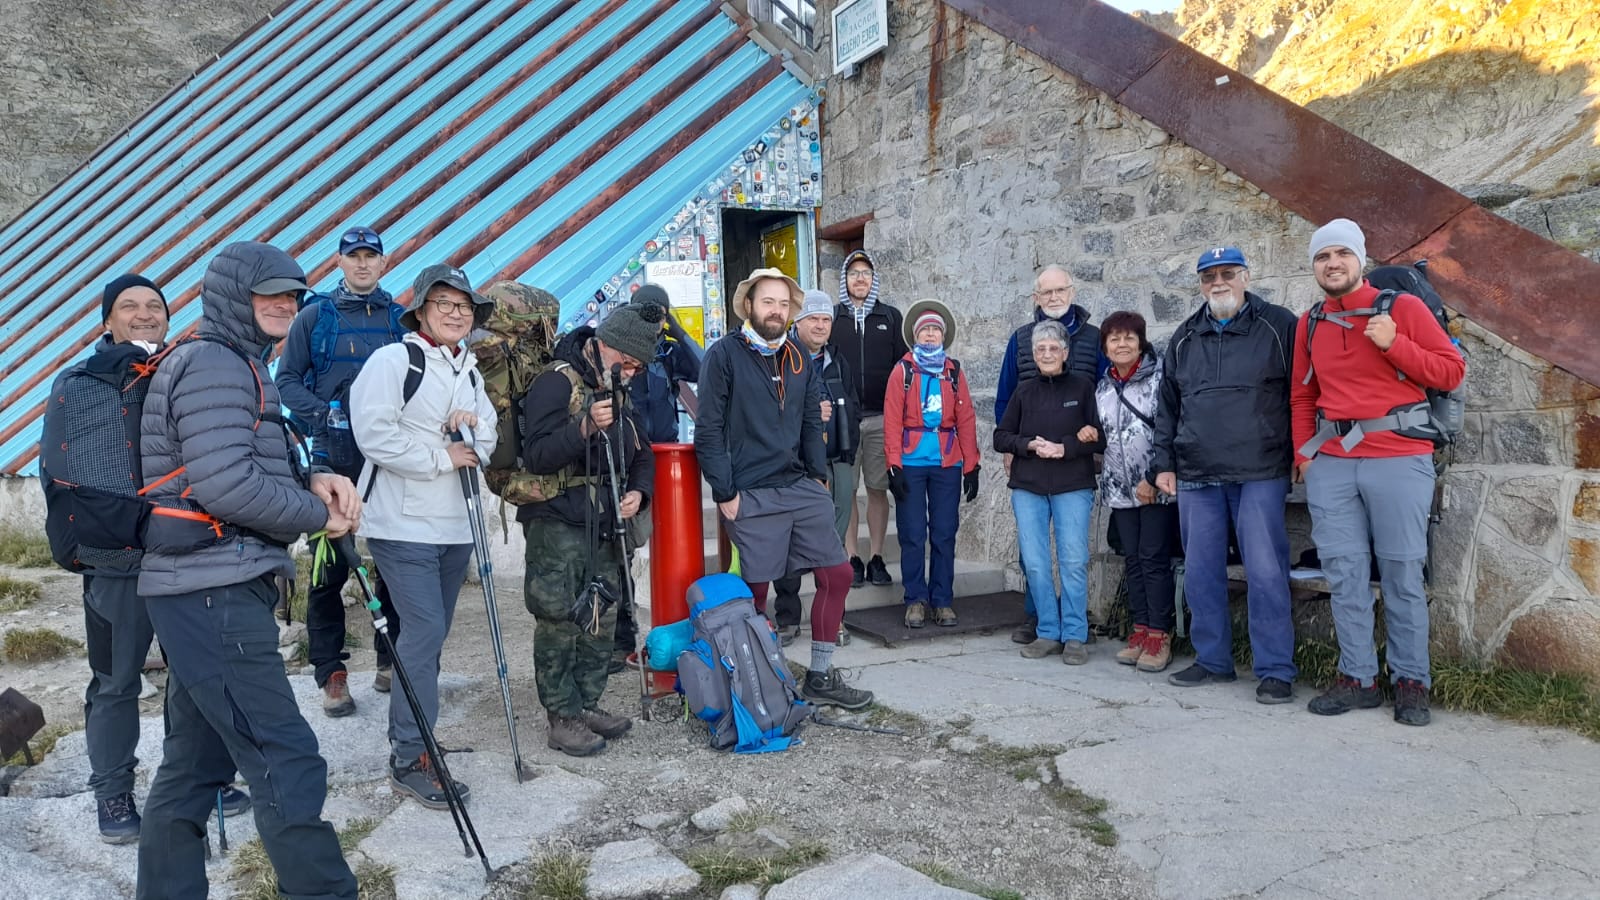 The TEN Trek Musala team beside their mountain hut for the night in the high Rila Mountains